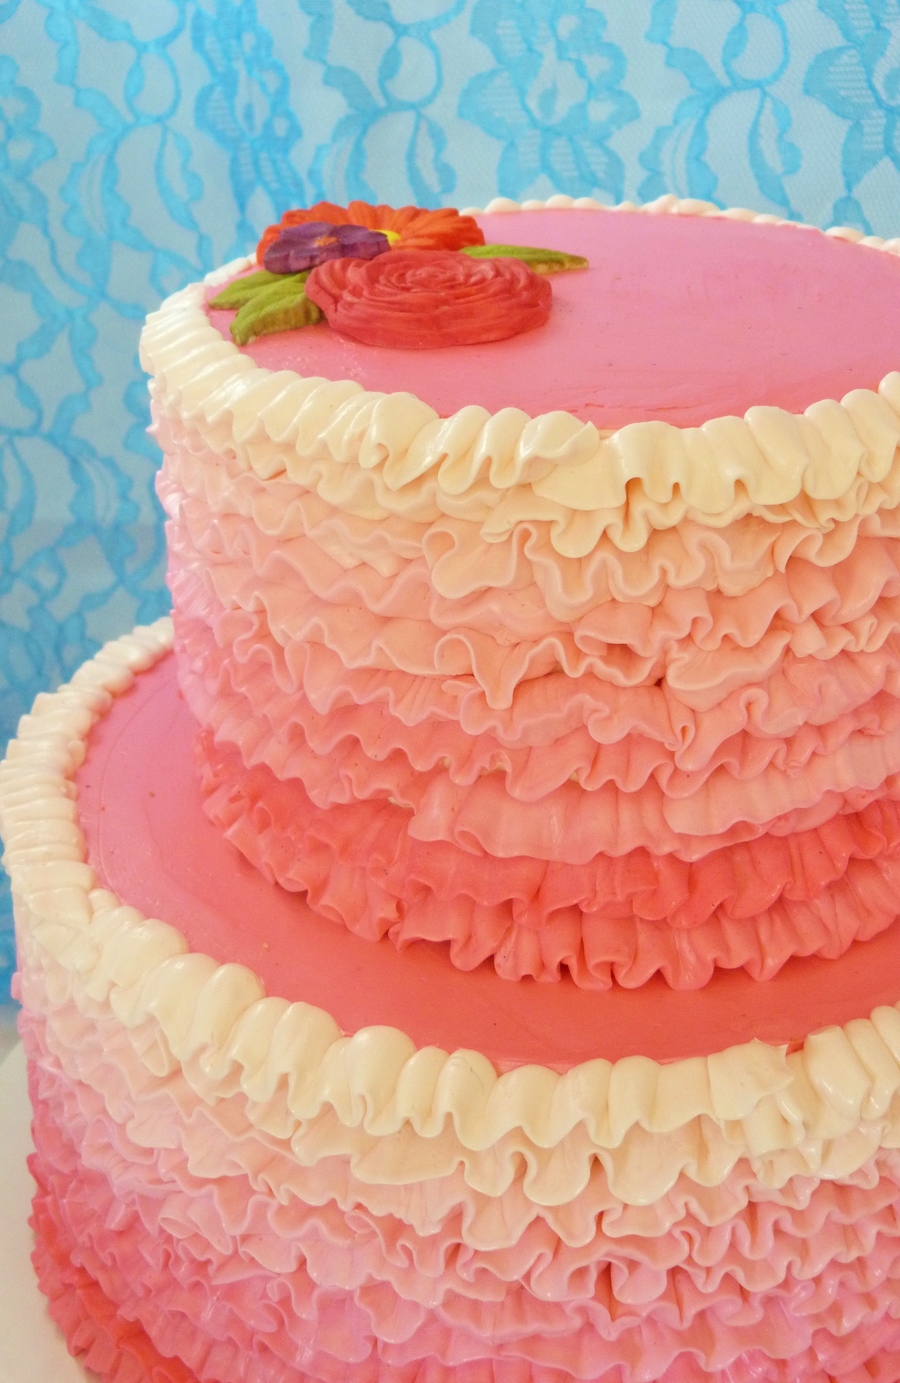 Top 25 Cakes with Buttercream Ruffles - Page 15 of 25